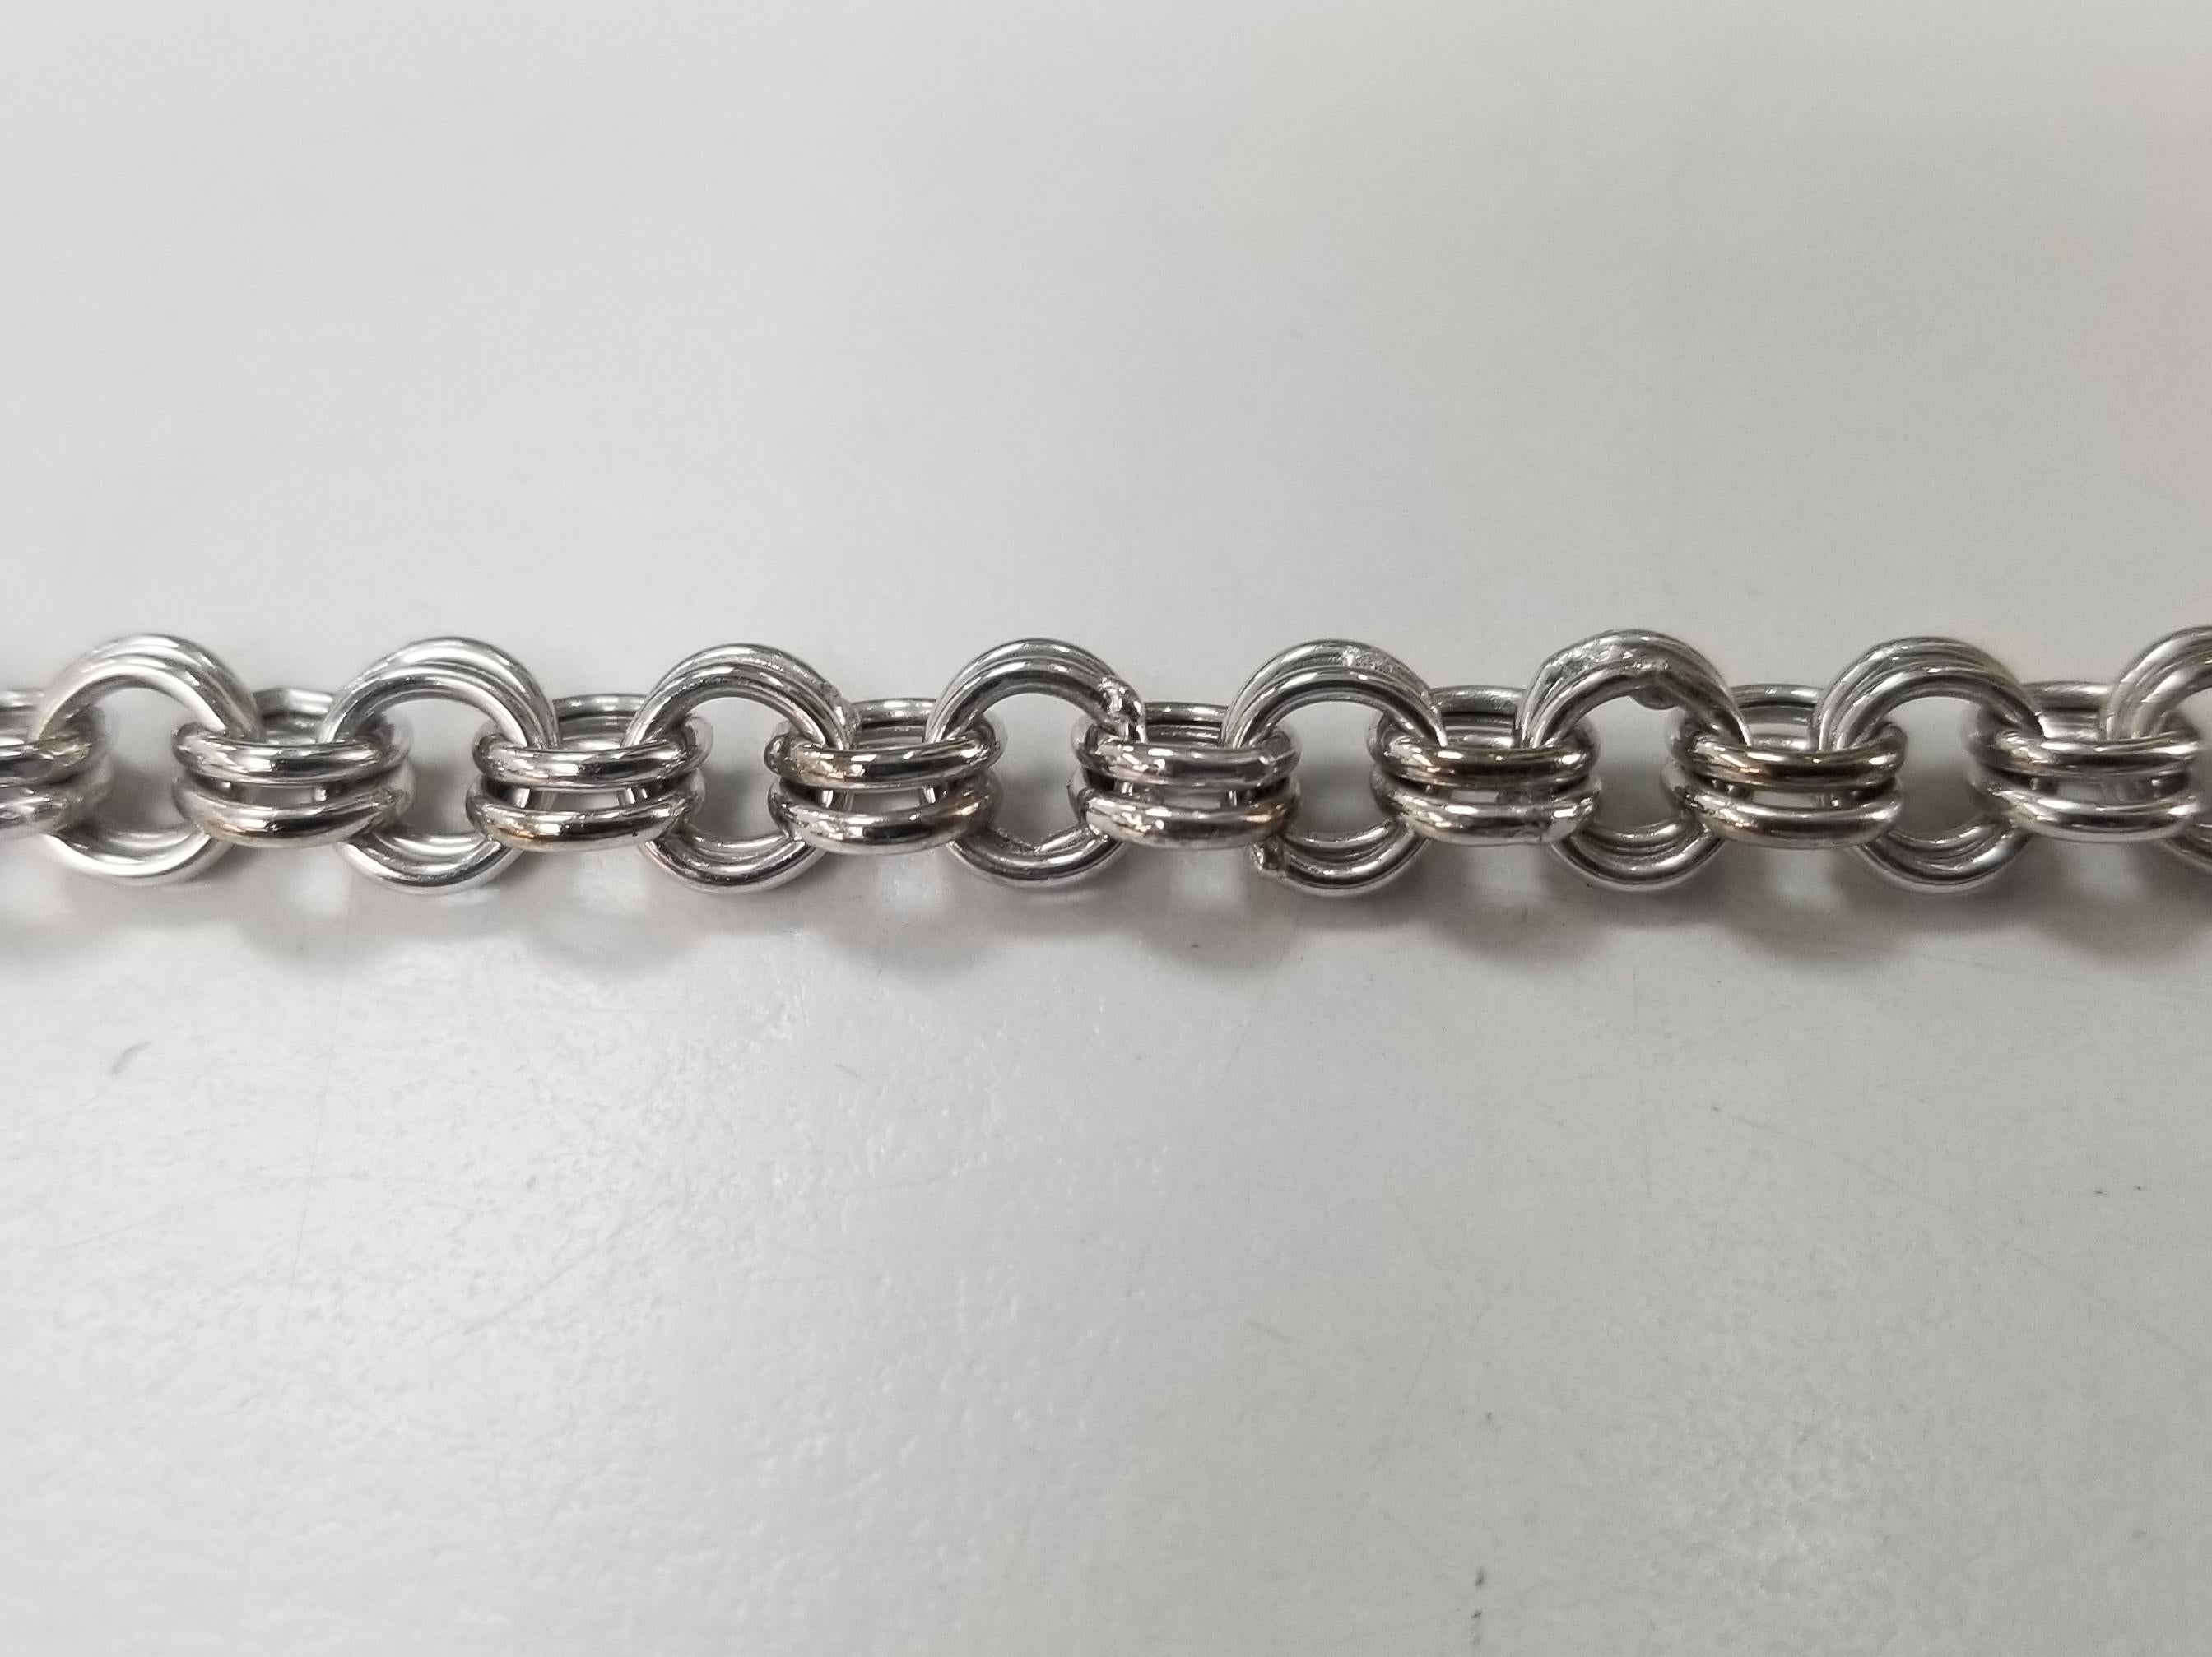 14 karat white gold 7.25 inch 5.5mm double charm link bracelet weighing 7.4 grams.